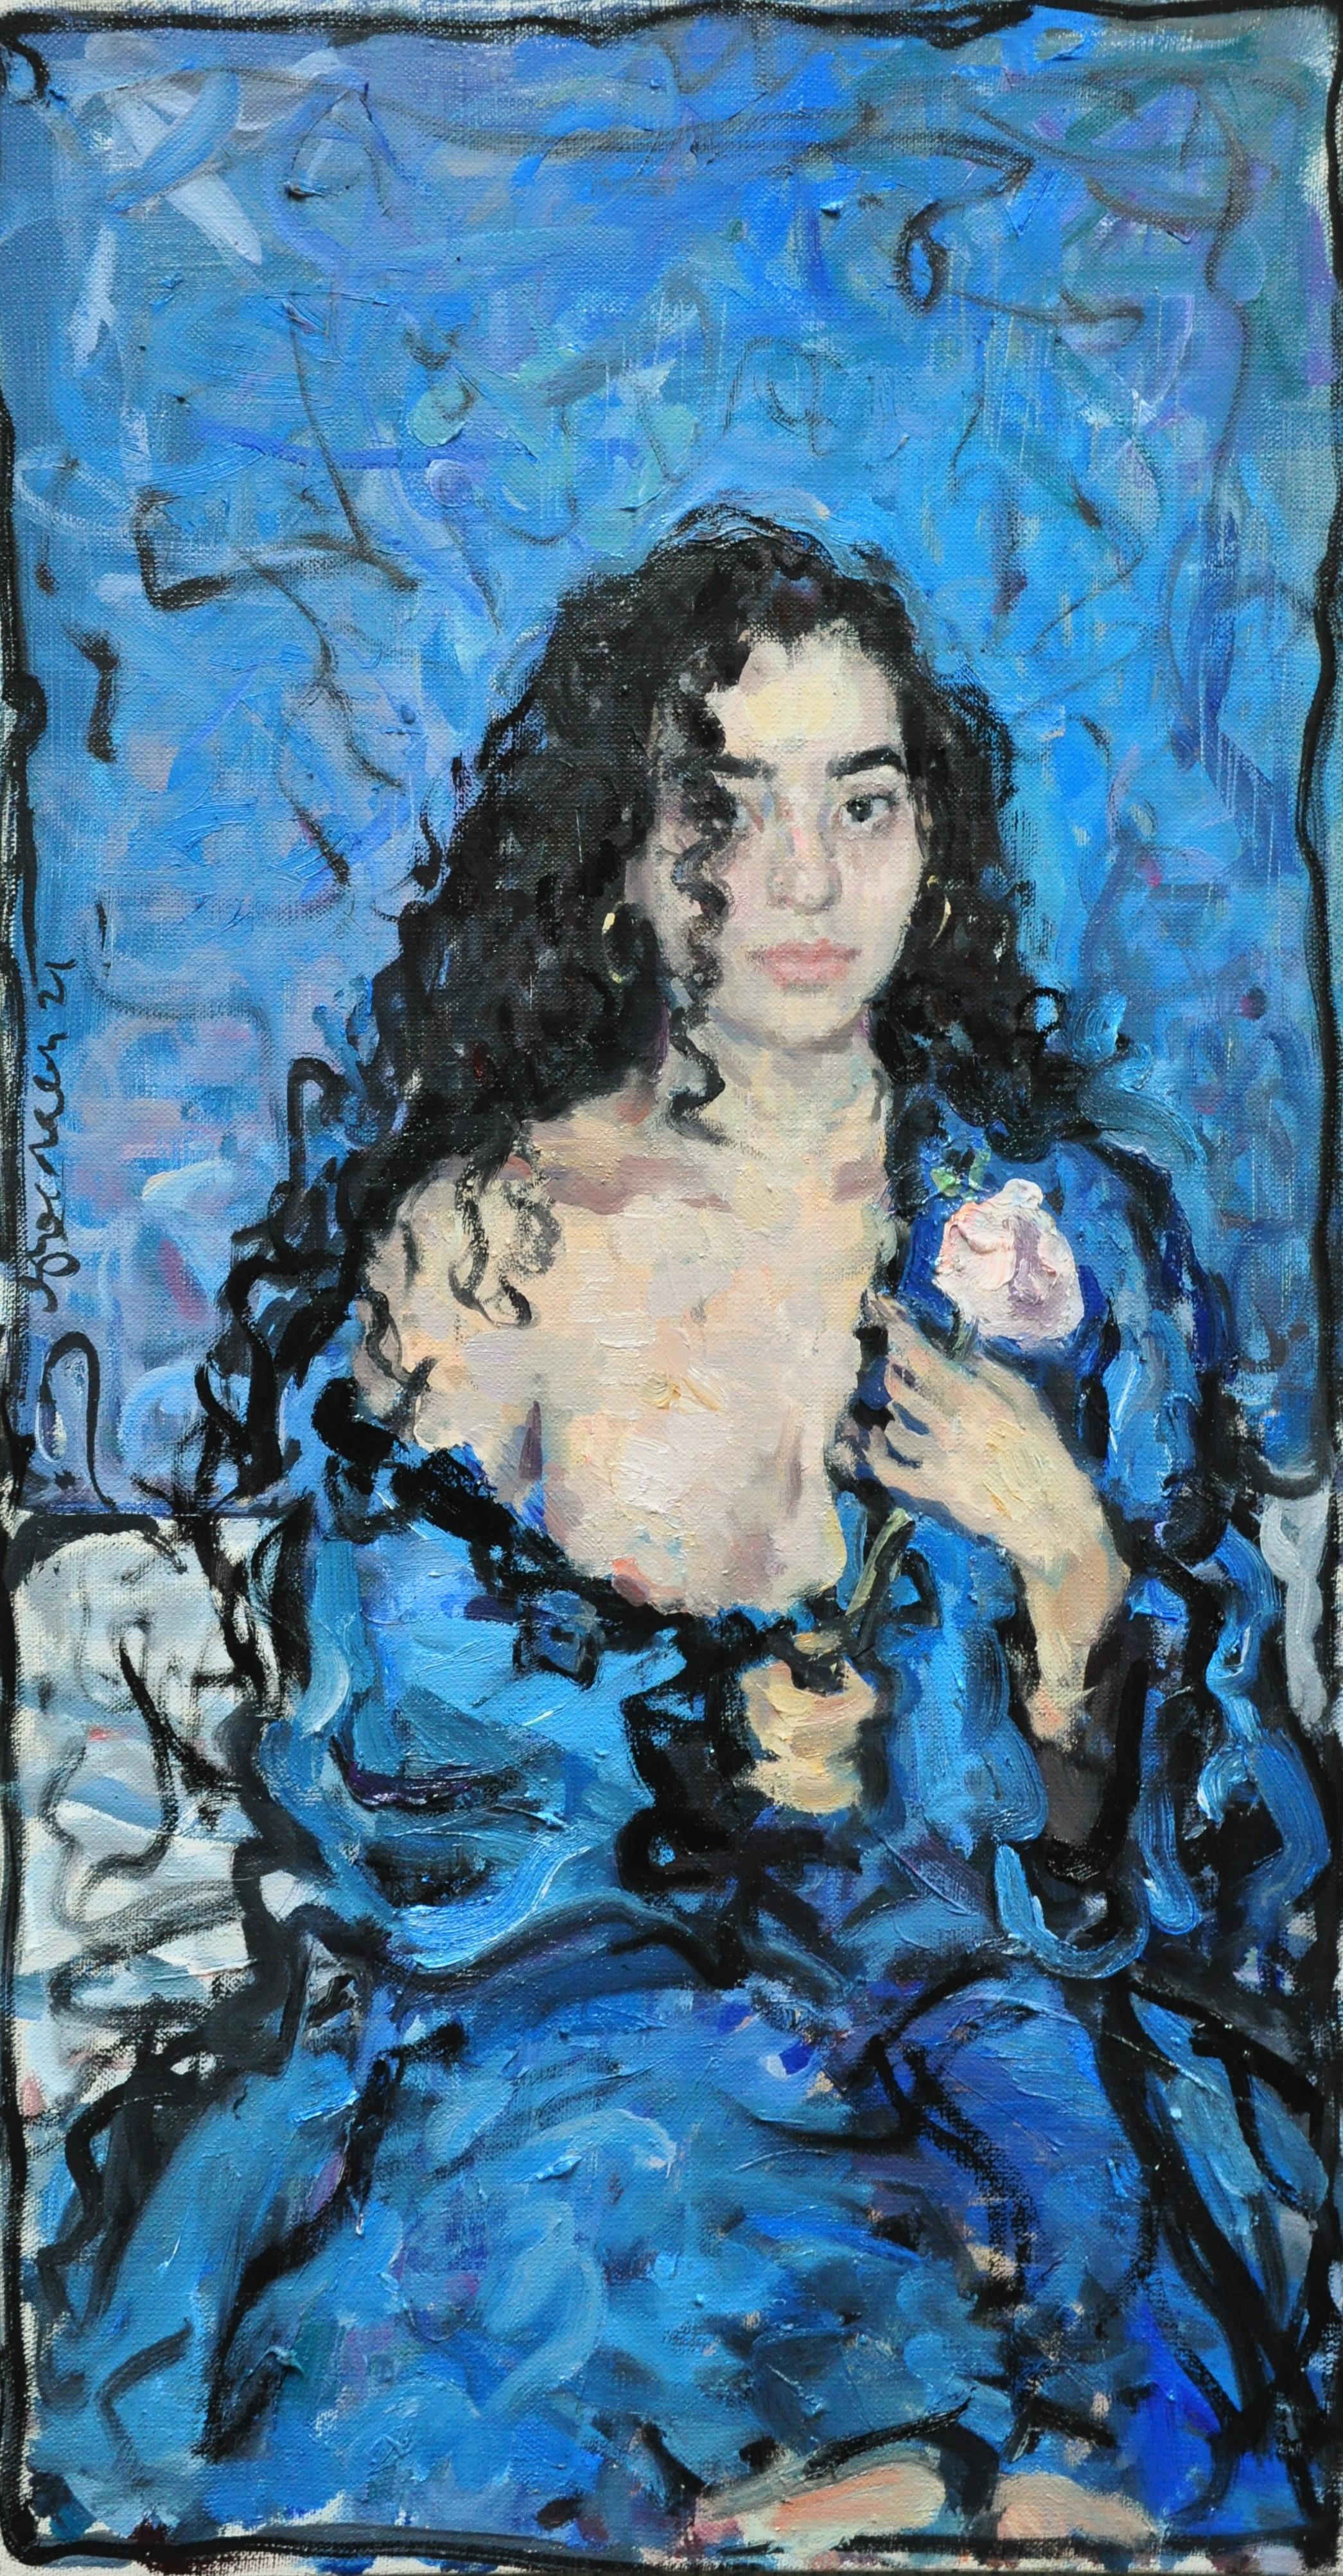 Girl With a Rose - 21st Century Contemporary Oil Female Portrait Painting